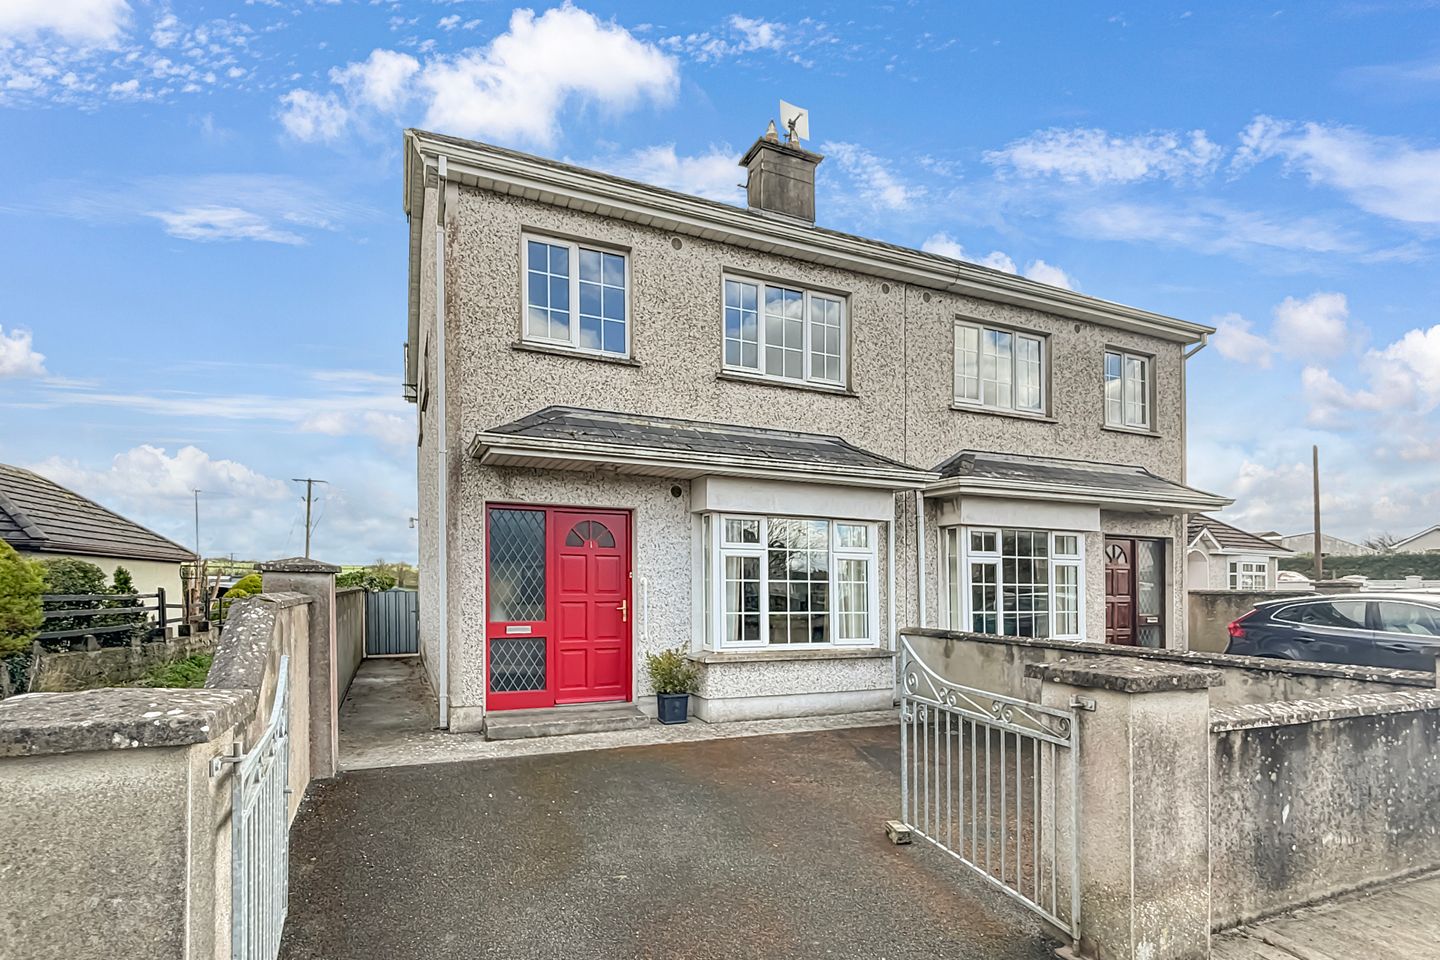 1 Mill Place, Templemore Rd, Cloughjordan, Co. Tipperary, E53NW59